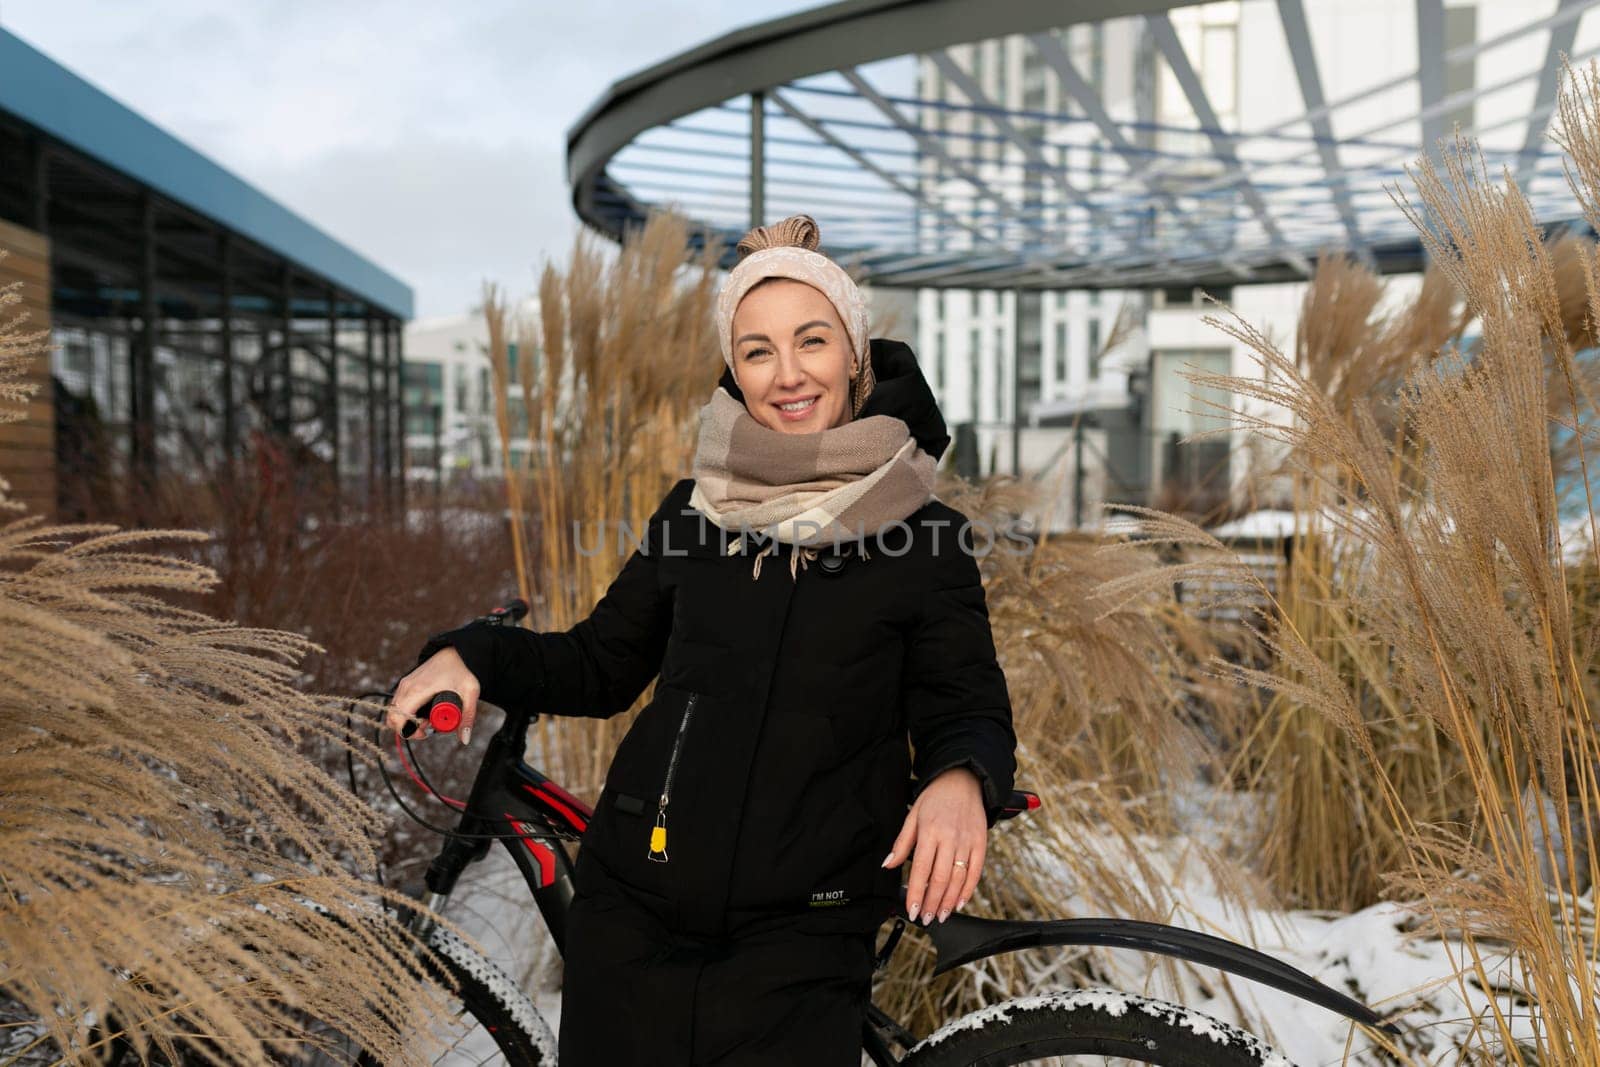 Athletic active young woman riding a bicycle on the street in winter.